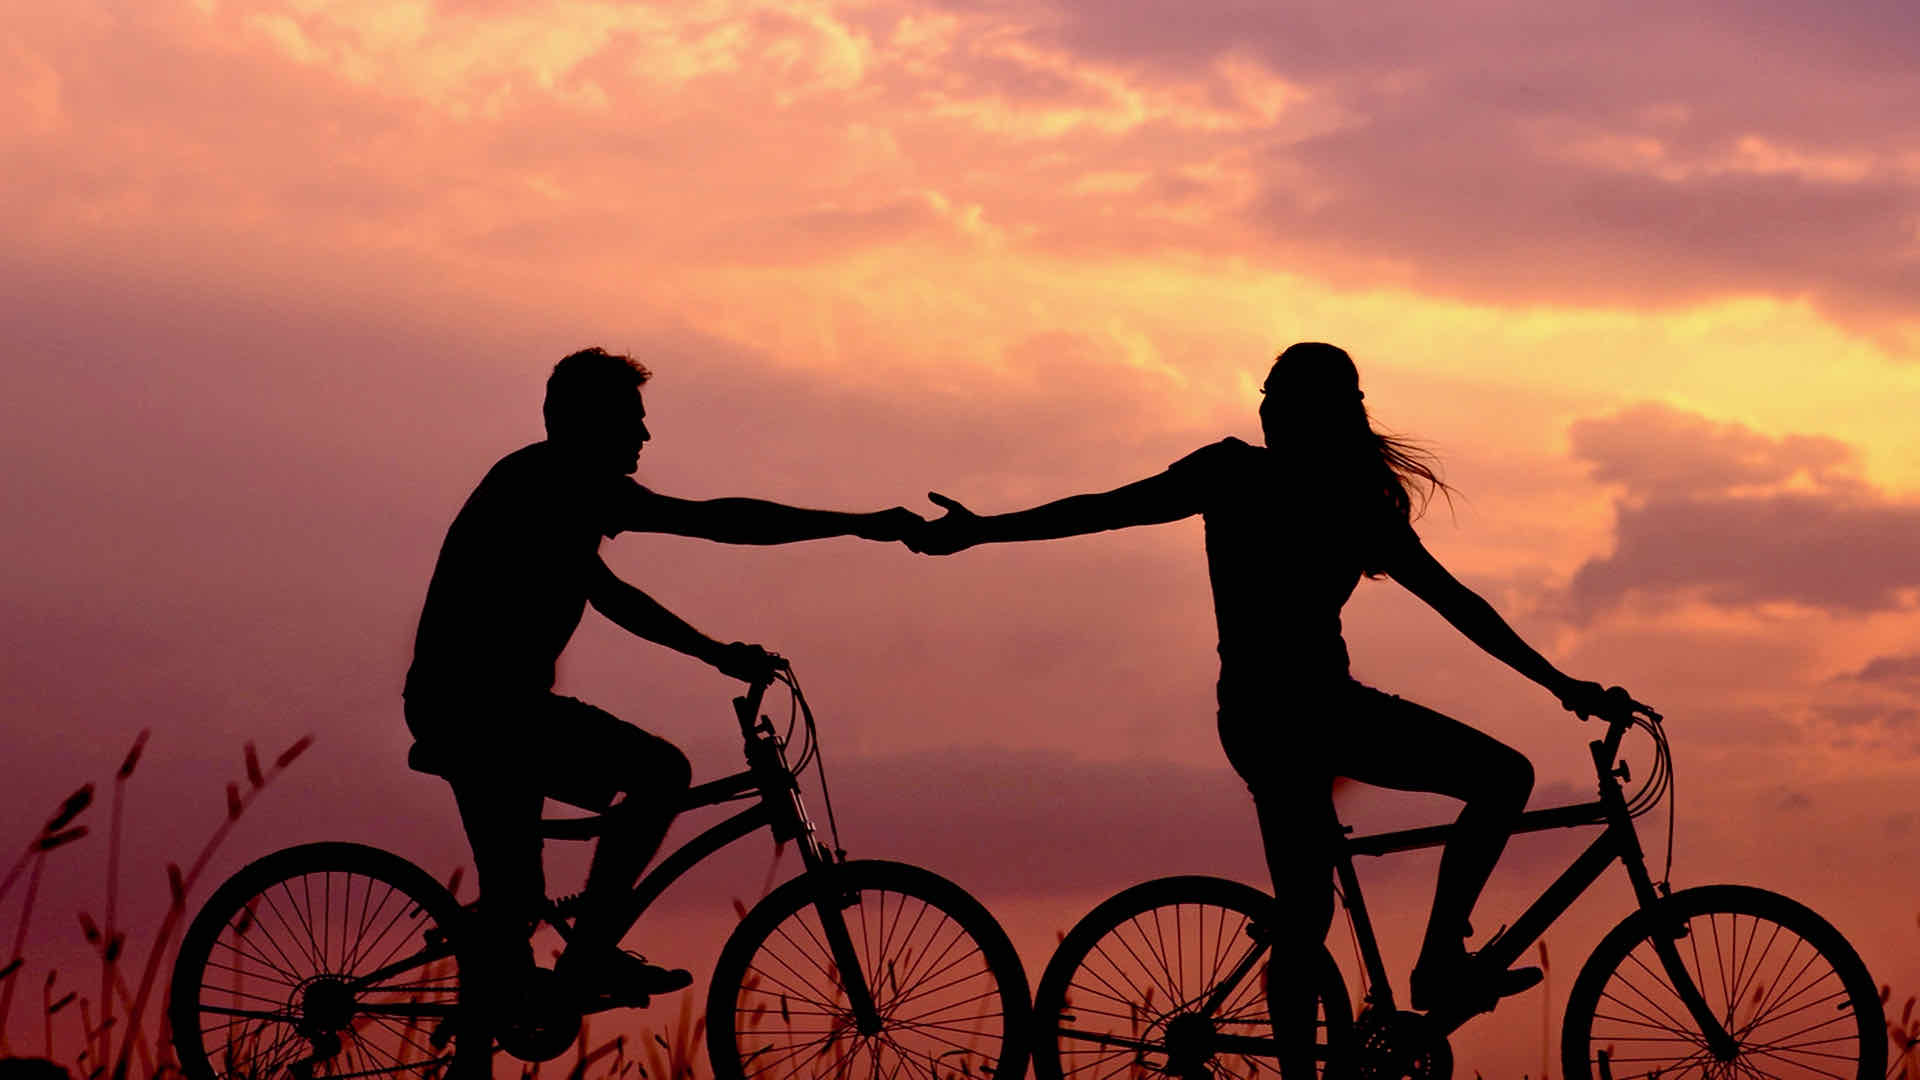 Holding hands on bicycles